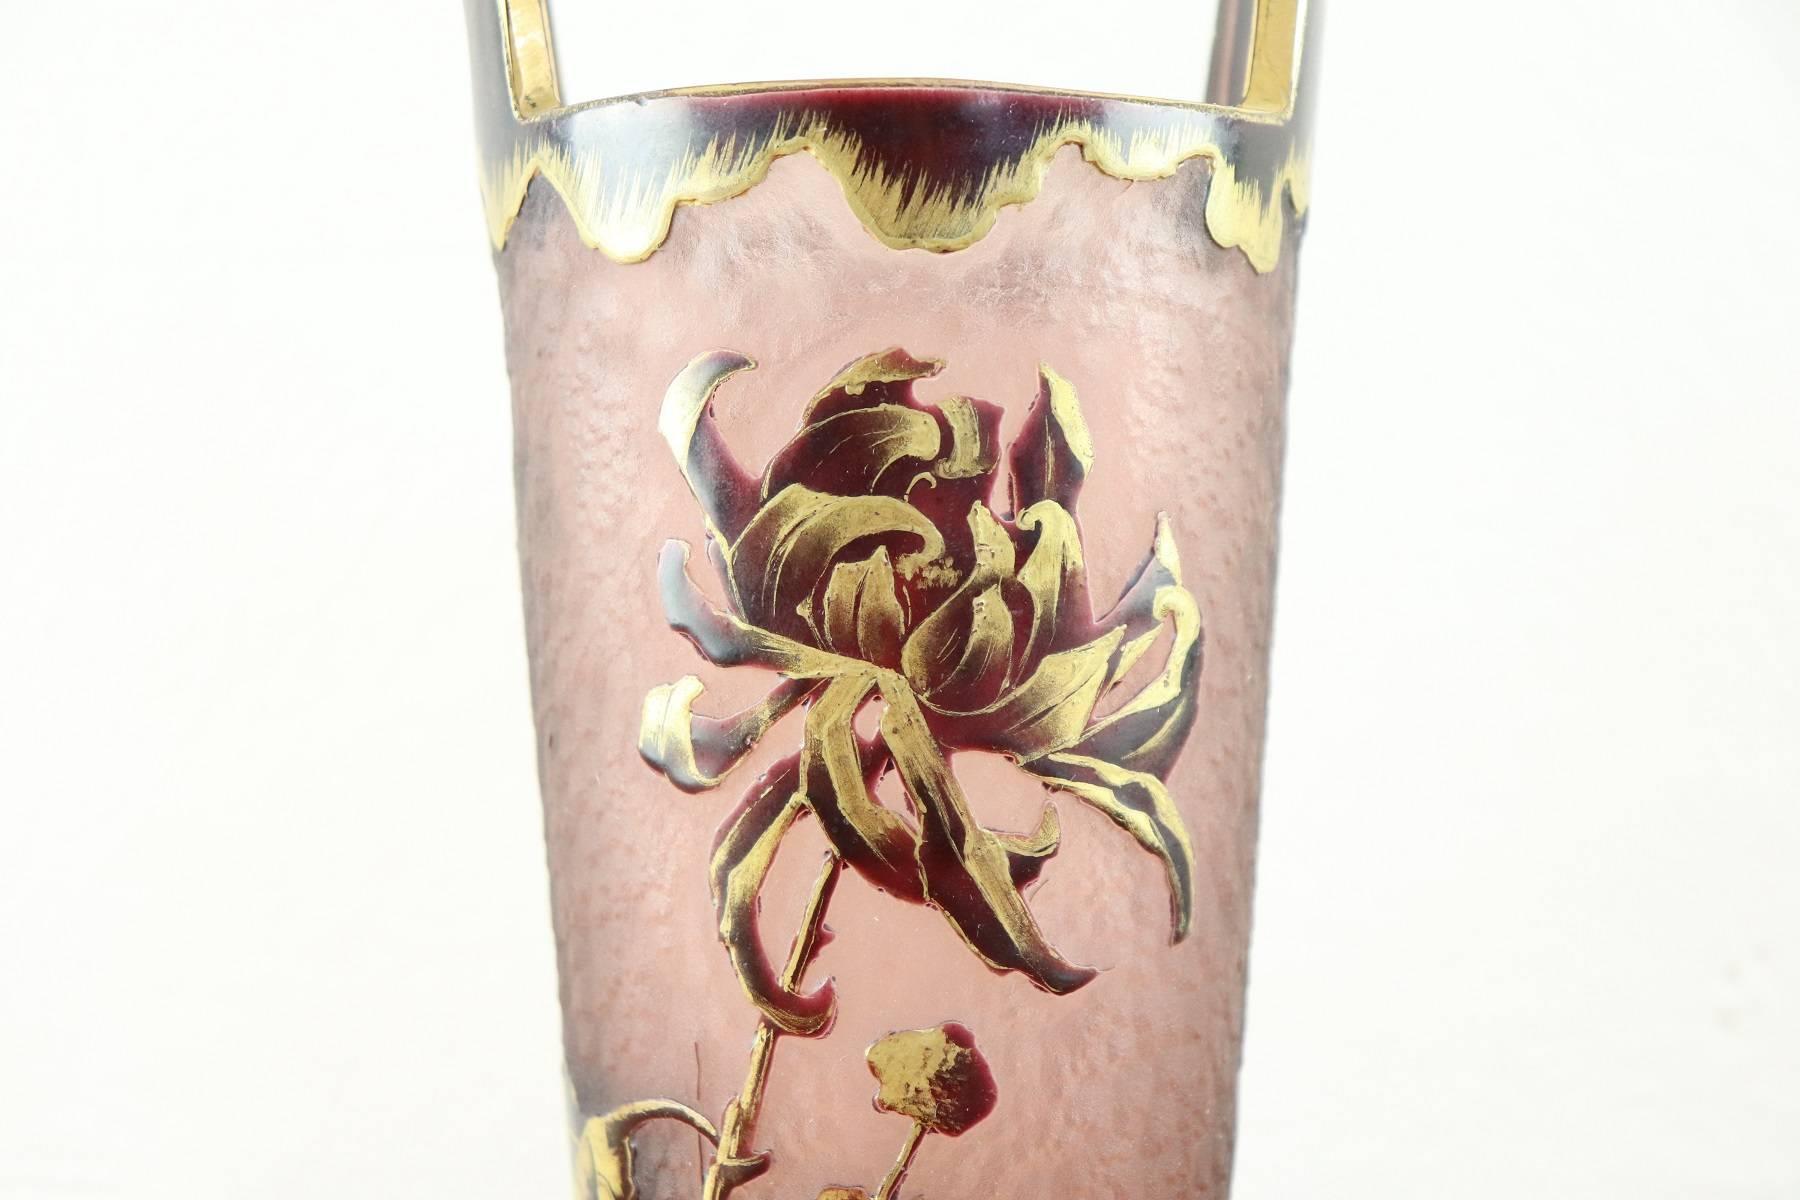 Important and refined French vase in frosted glass with floral relief decoration and enameled gold.
The vase is signed. 
Below the base is the shield with St. Denis and signature Mont Joye L C (Legras and C).
